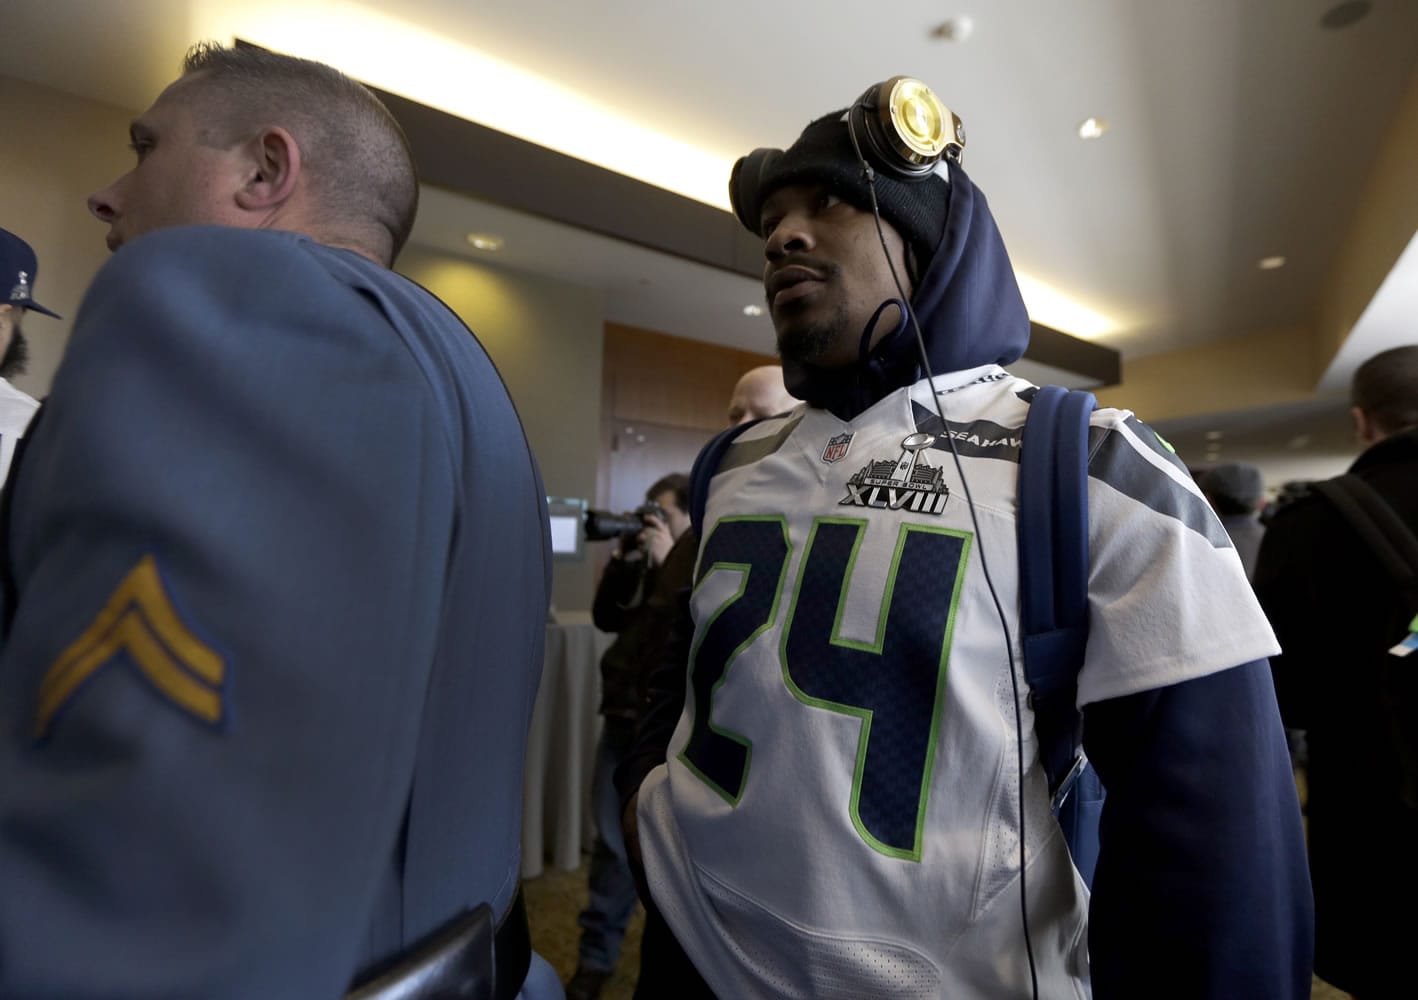 A member of the New Jersey state police escorts Seattle Seahawks running back Marshawn Lynch, right, through an area where a media availability was being held at the team's hotel Wednesday, Jan. 29, 2014, in Jersey City, N.J. The Seahawks and the Denver Broncos are scheduled to play in the Super Bowl XLVIII football game Sunday, Feb. 2, 2014.